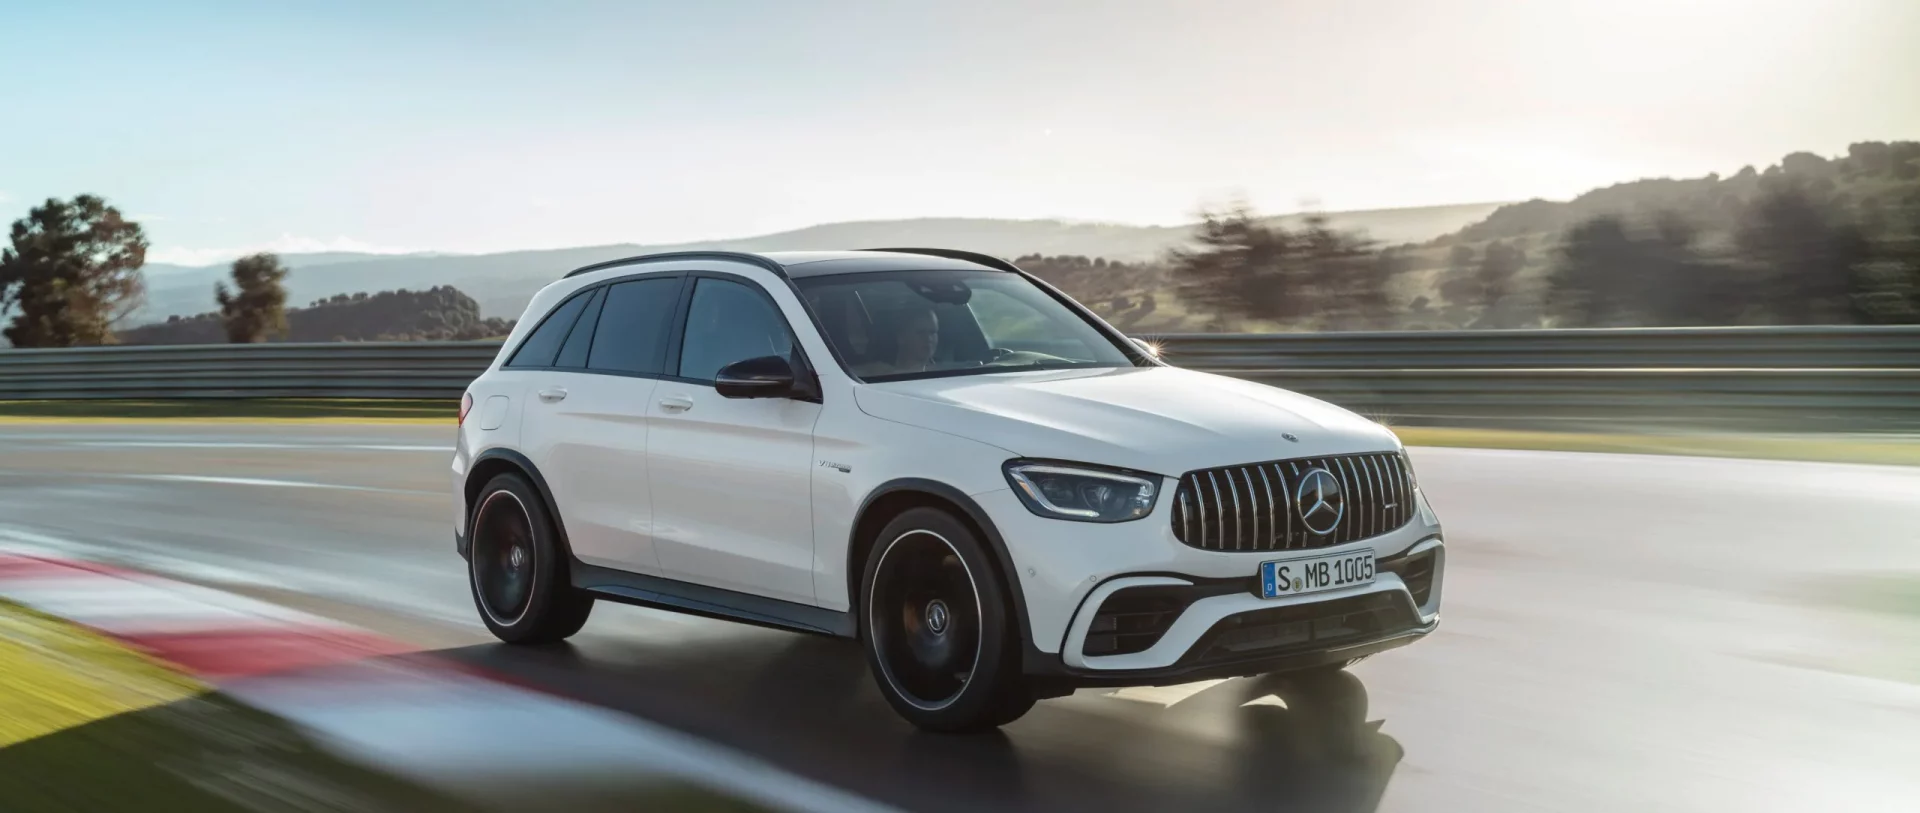 Mercedes-Benz GLC-Class AMG GLC 63 S front angular view in the motion on the motorway